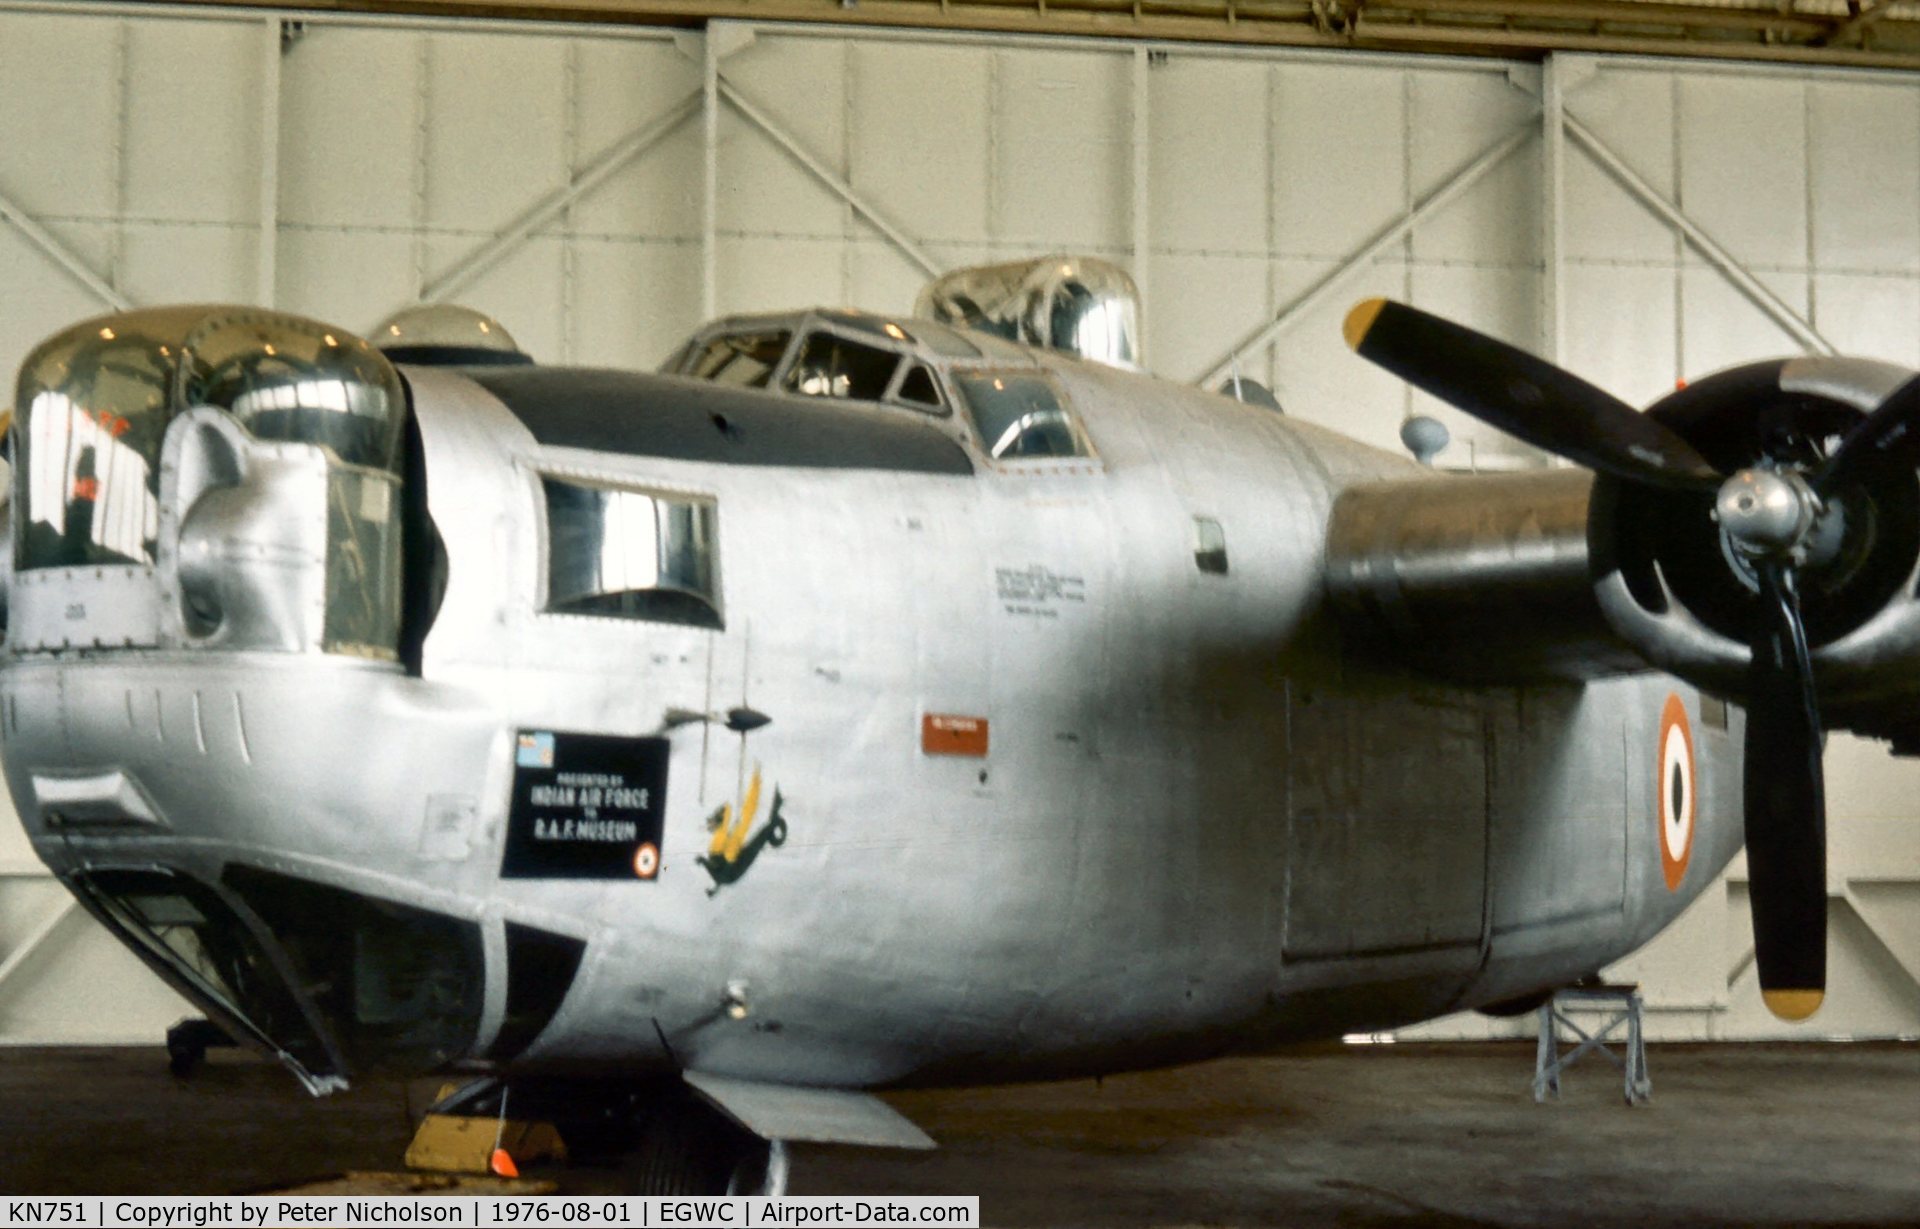 KN751, Consolidated B-24 Liberator C/N 6707L, The Liberator was still in Indian Air Force markings when seen at Cosford in the Summer of 1976.